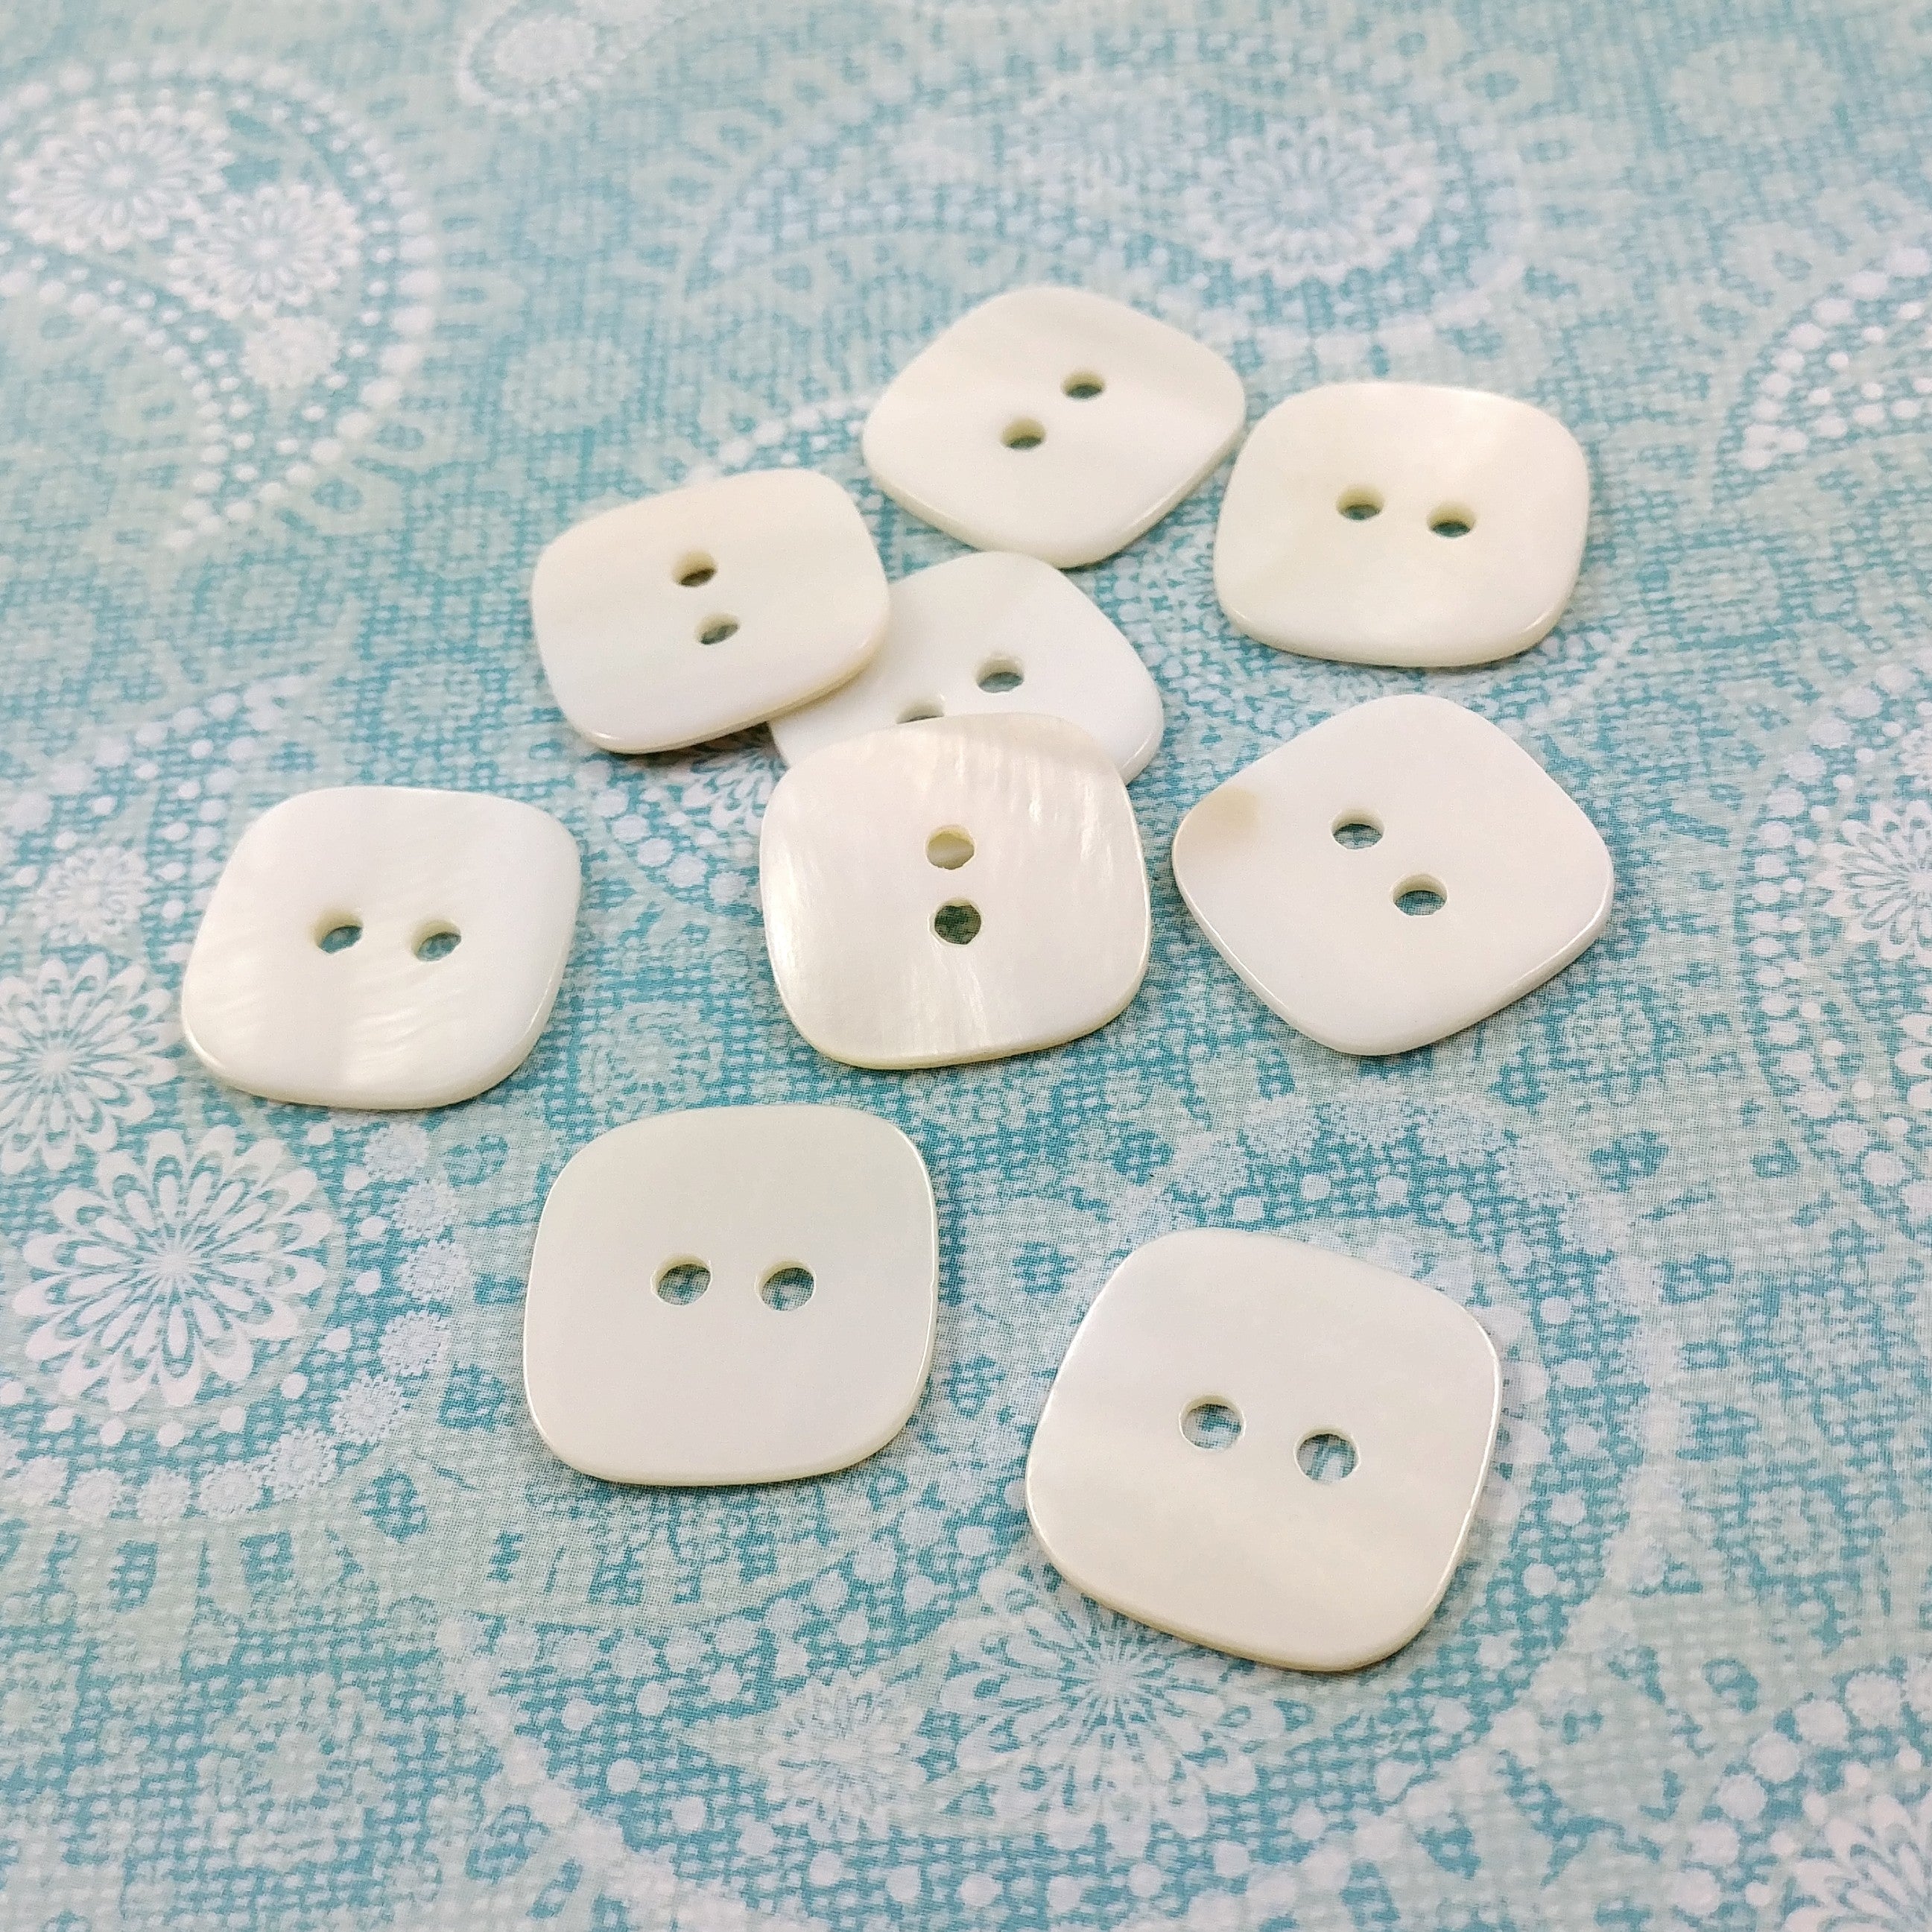 4 Vintage Mother of Pearl Buttons Large Size, 4 Big Mother of Pearl Buttons,  Extra Large Natural Shell Buttons, Oyster Shell Buttons -  Finland